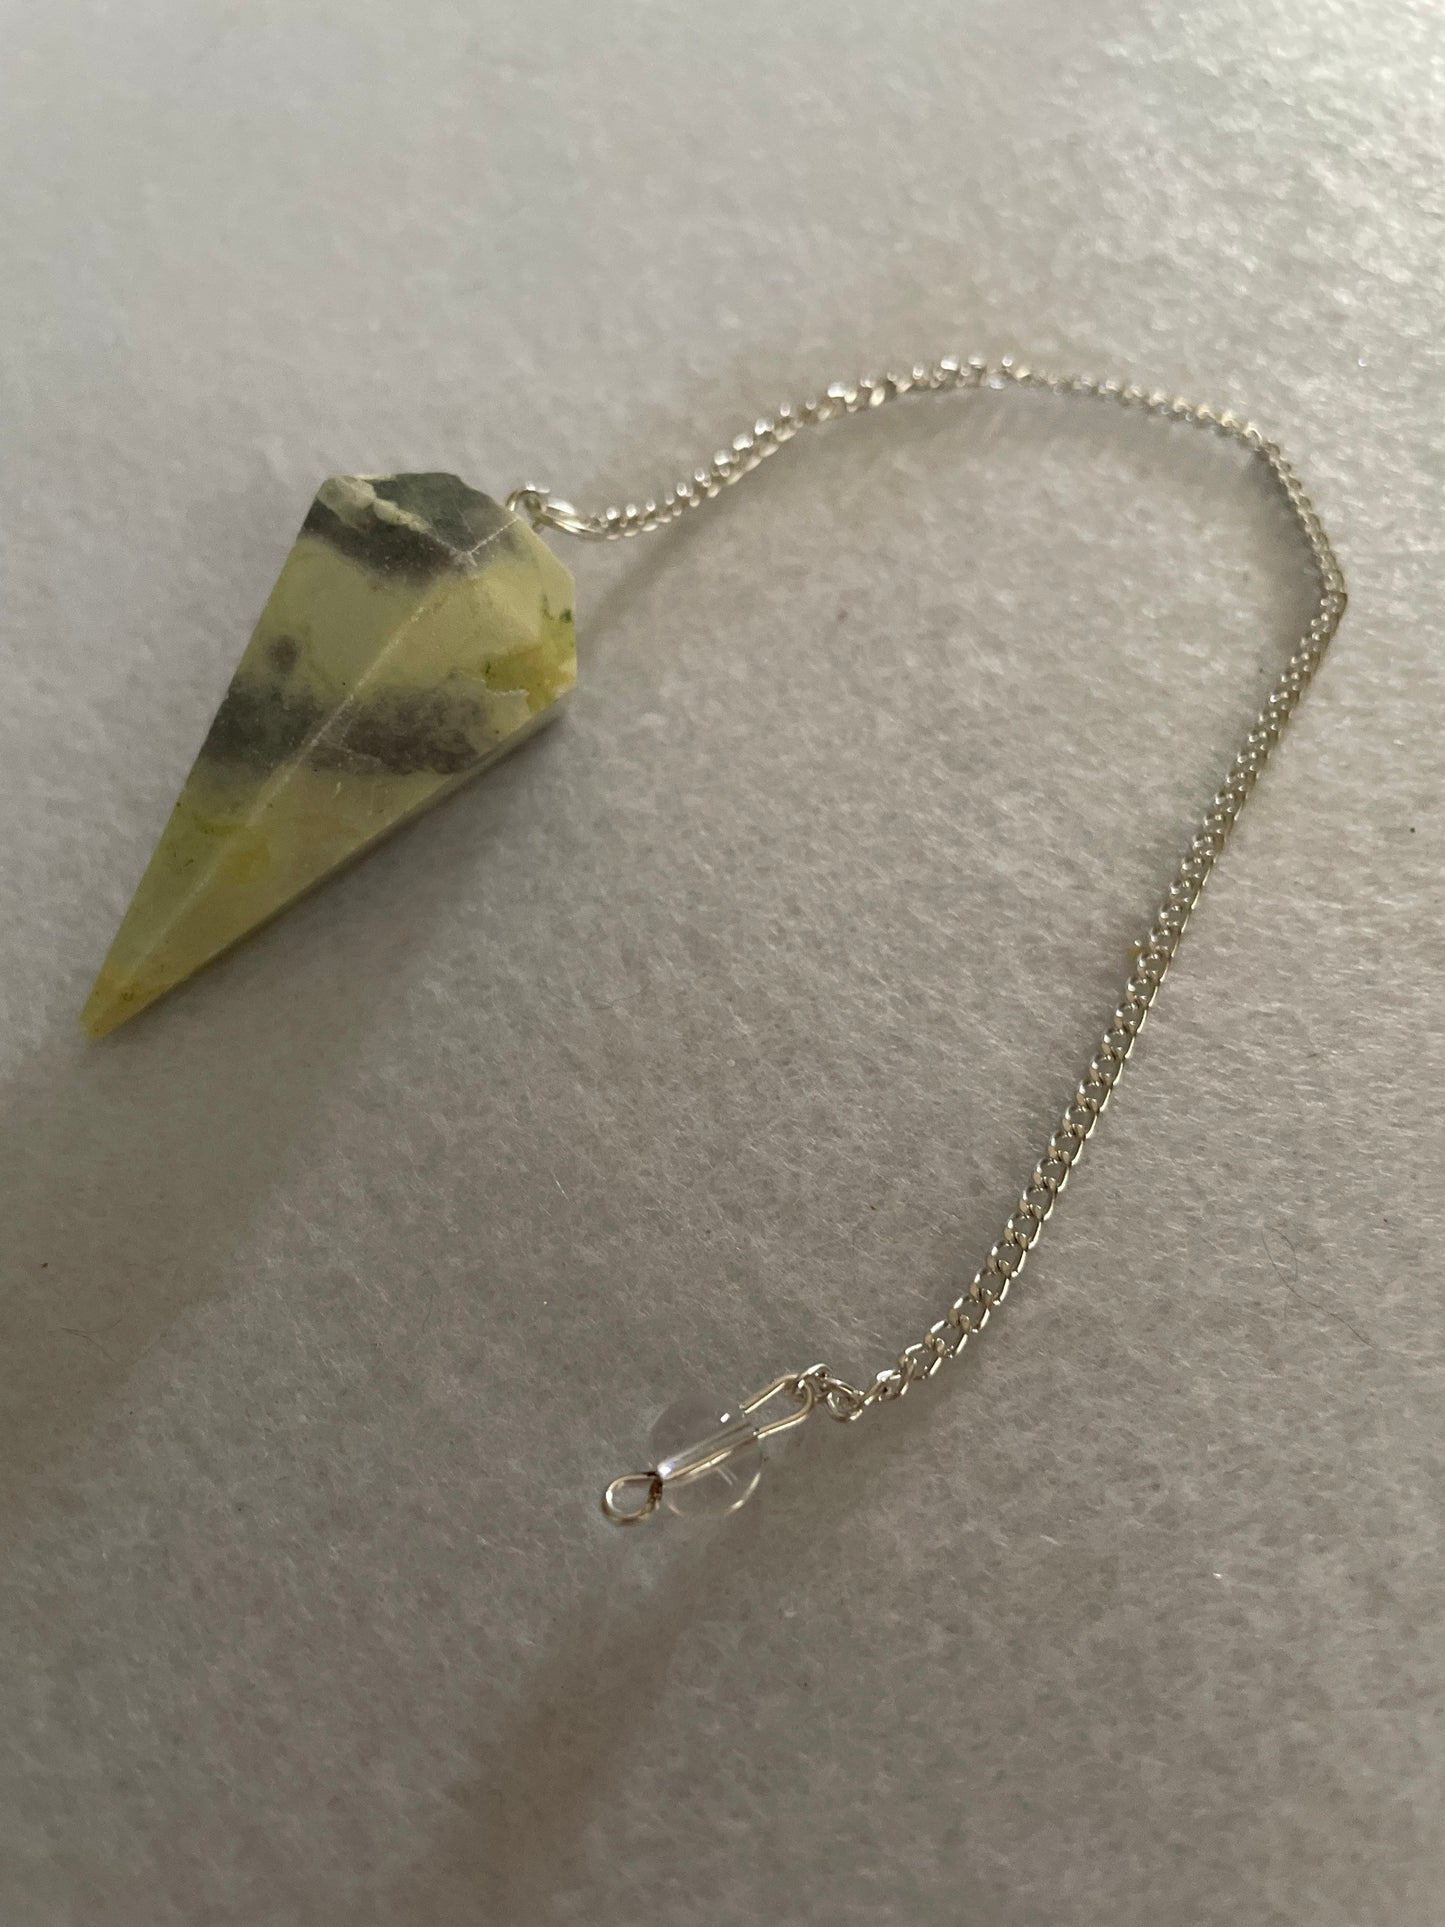 Beautiful Serpentine Pendulum is  1.85” and with chain is 8.5”